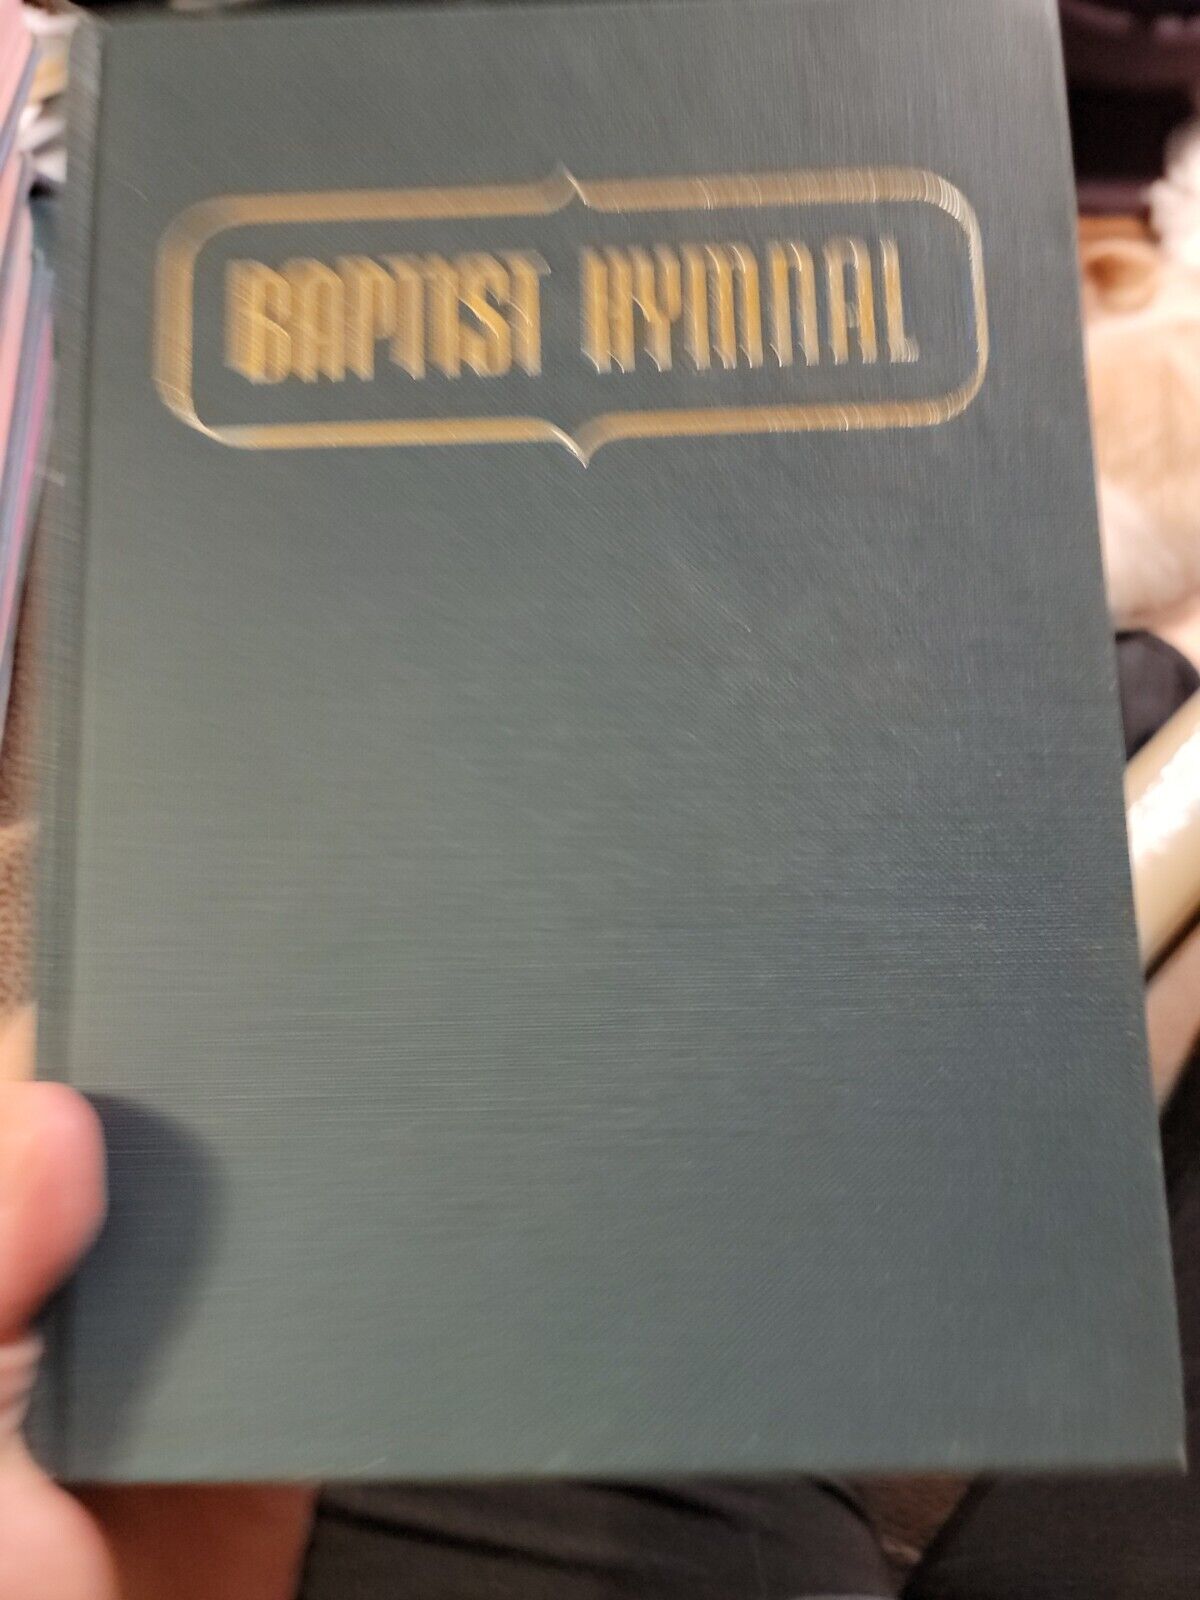 Baptist Hymnal  Walter Hines Sims 1956 Hardcover 28th Printing Convention Press